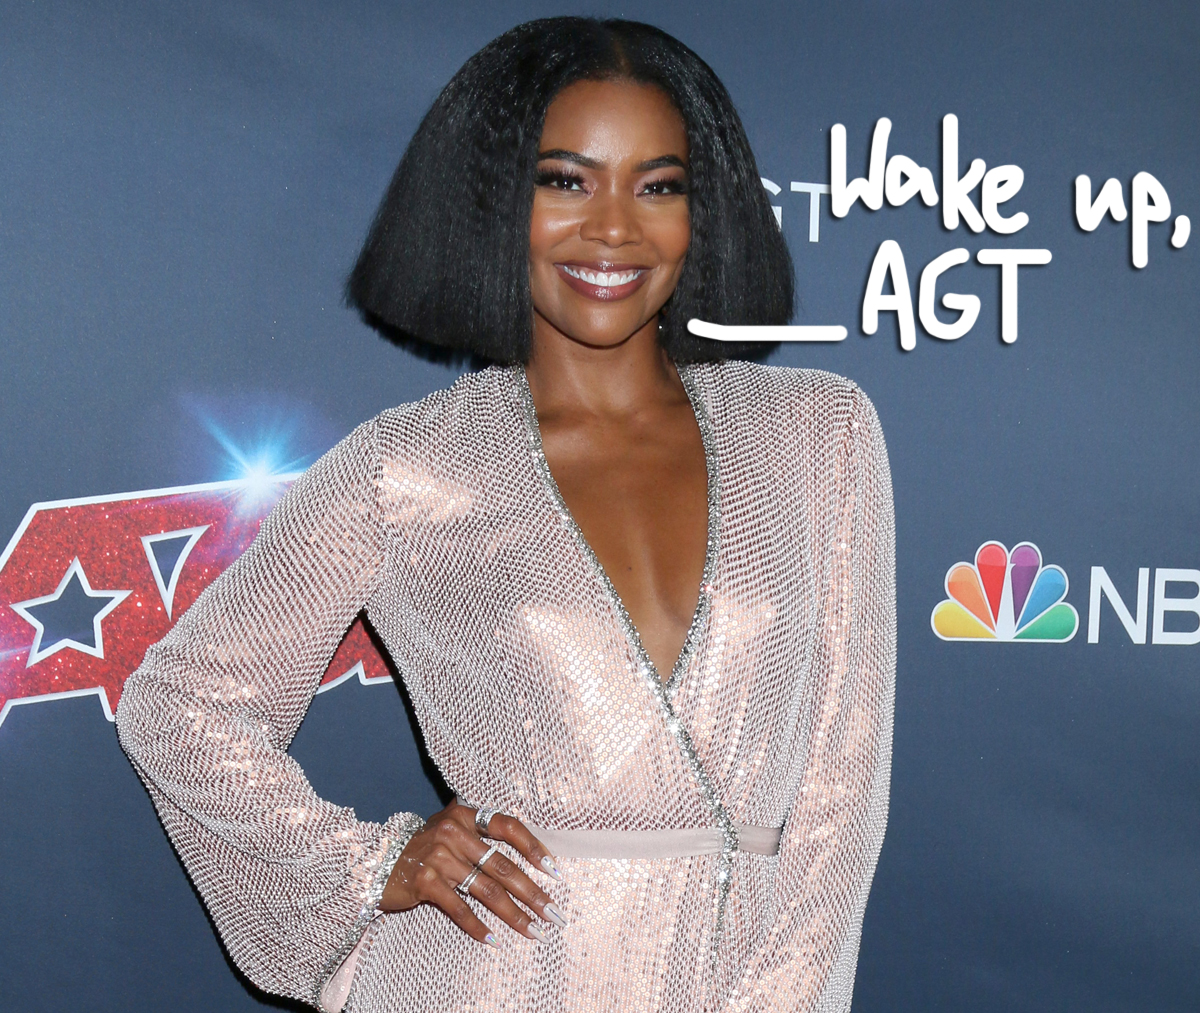 Gabrielle Union Was FIRED From 'America's Got Talent' After Reporting